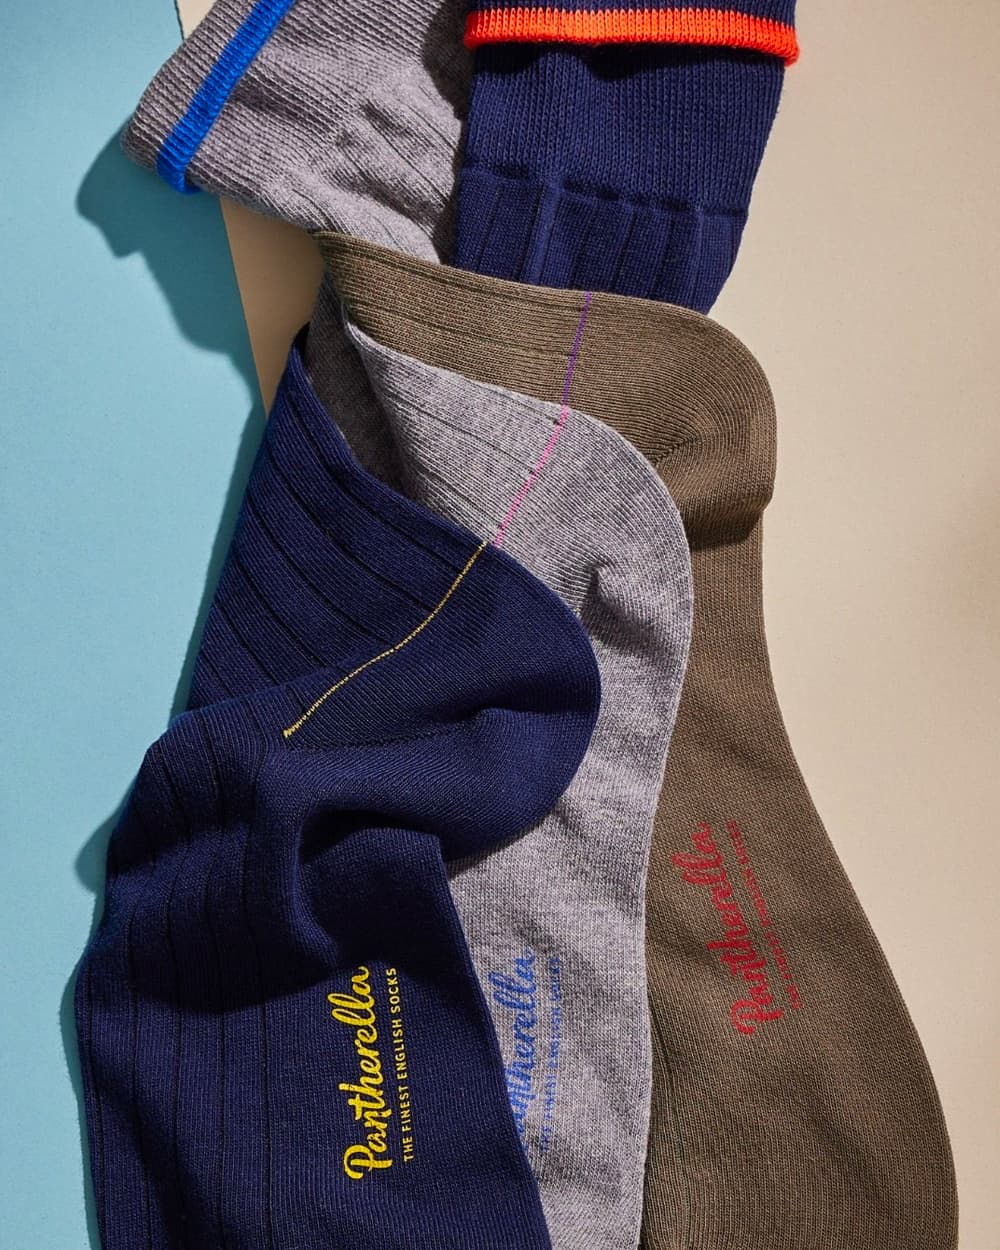 Three luxury men's Pantherella socks in navy, grey and olive green